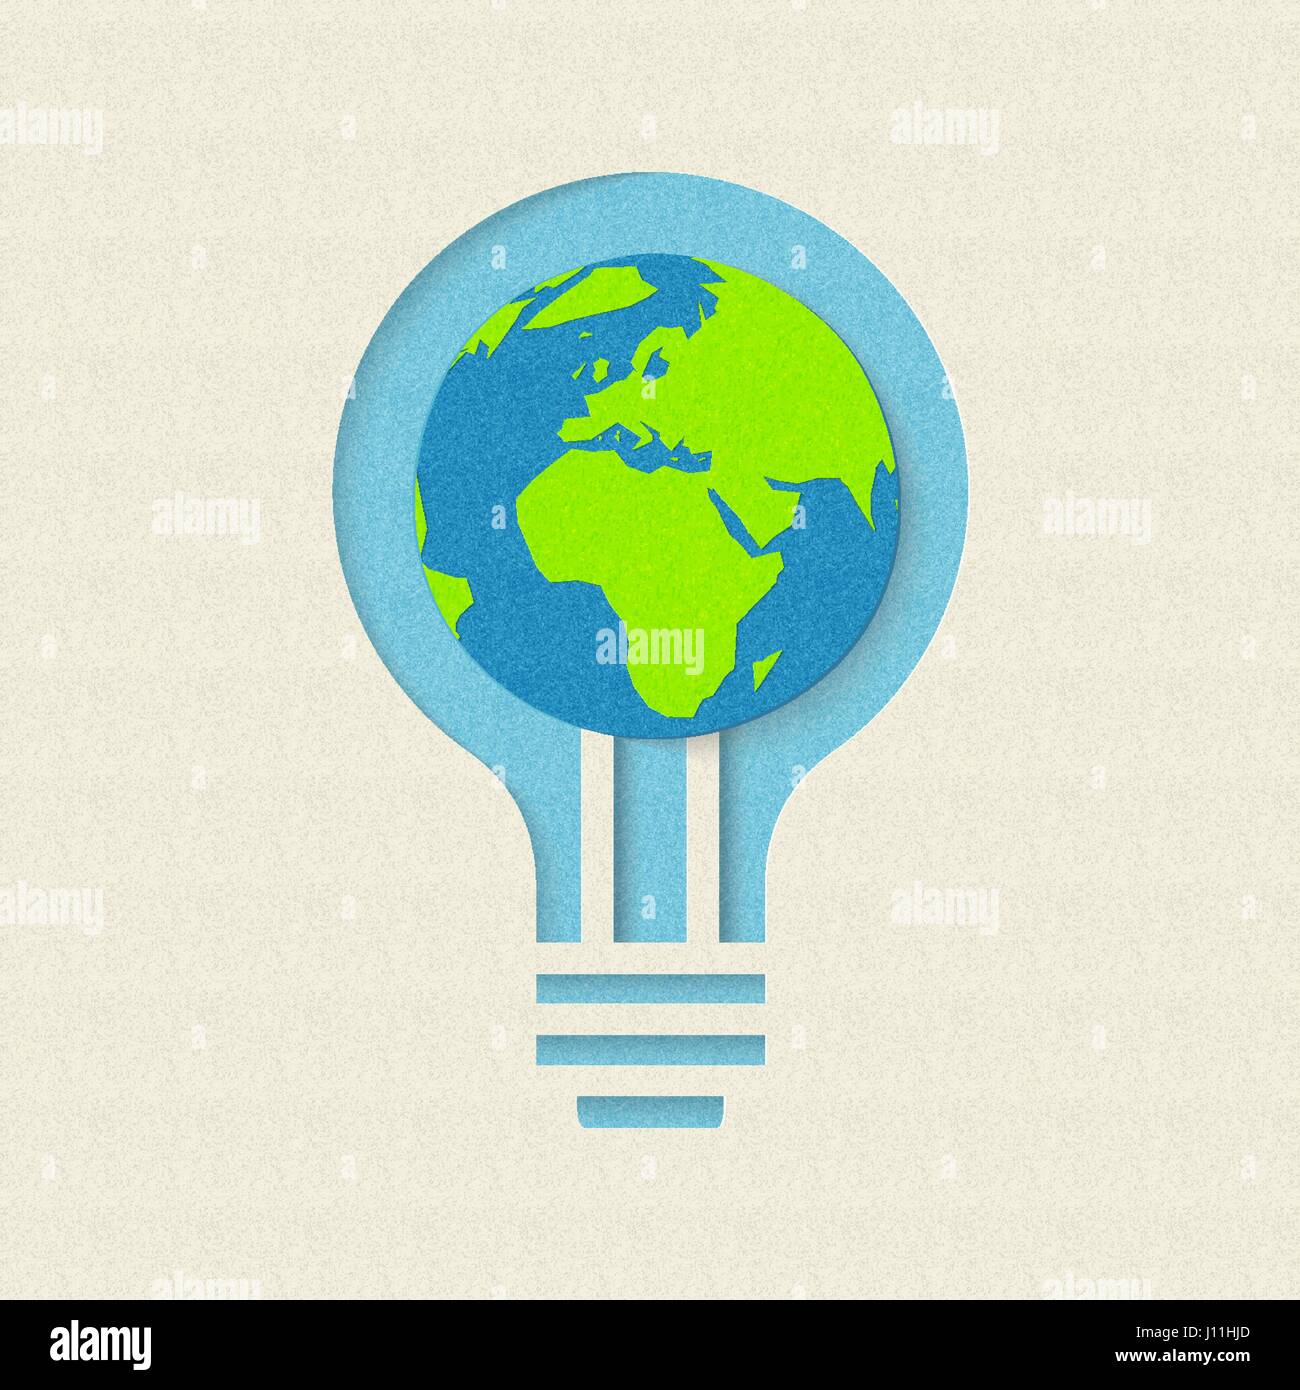 Earth day paper cut concept for green energy conservation and recycling. World environment care illustration. EPS10 vector. Stock Vector